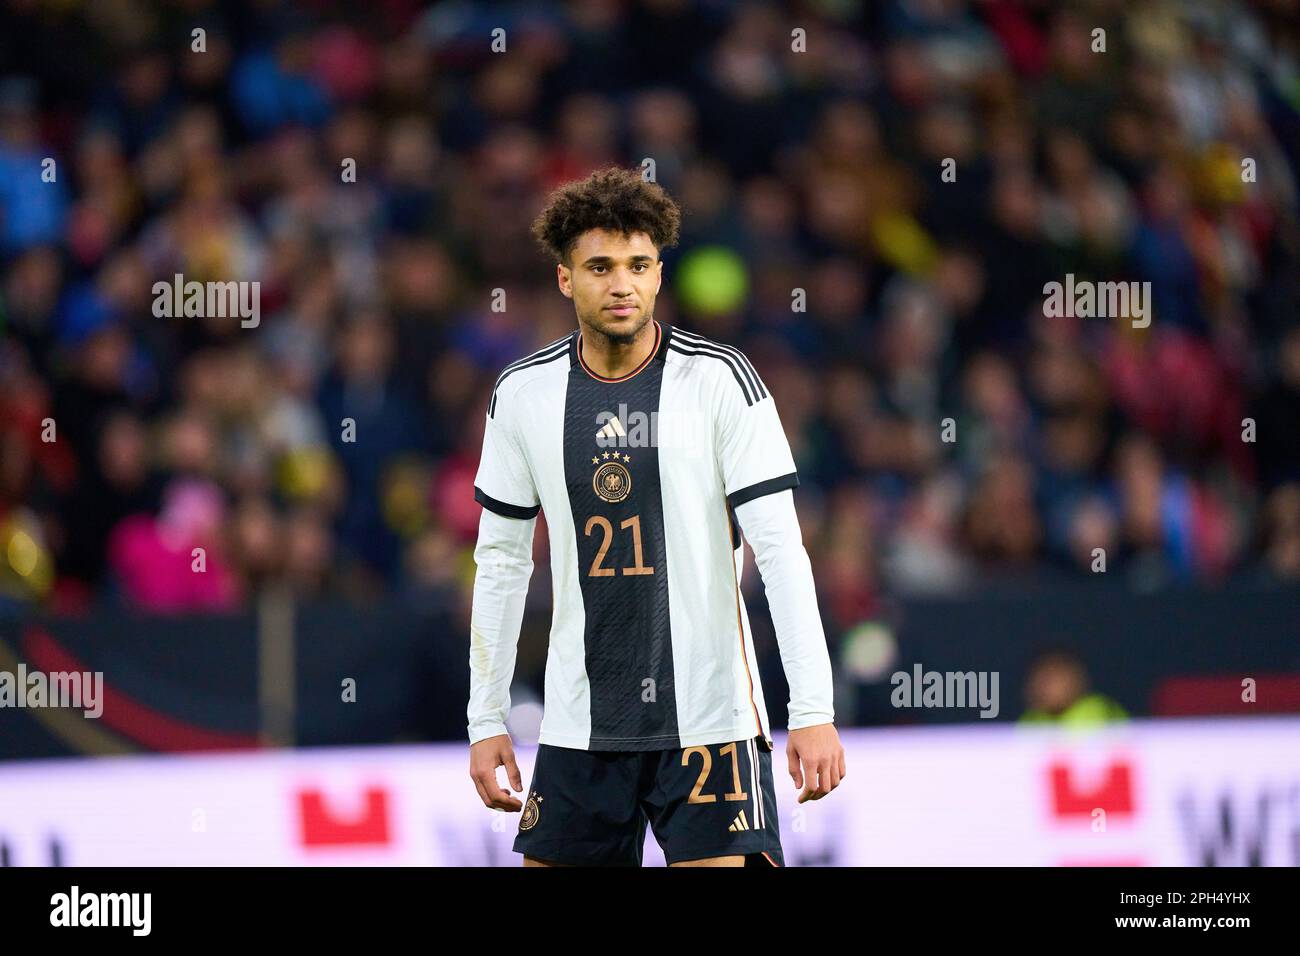 Kevin Schade, DFB 21  in the friendly match GERMANY - PERU 2-0 Preparation for European Championships 2024 in Germany ,Season 2022/2023, on Mar 25, 2023  in Mainz, Germany.  © Peter Schatz / Alamy Live News Stock Photo